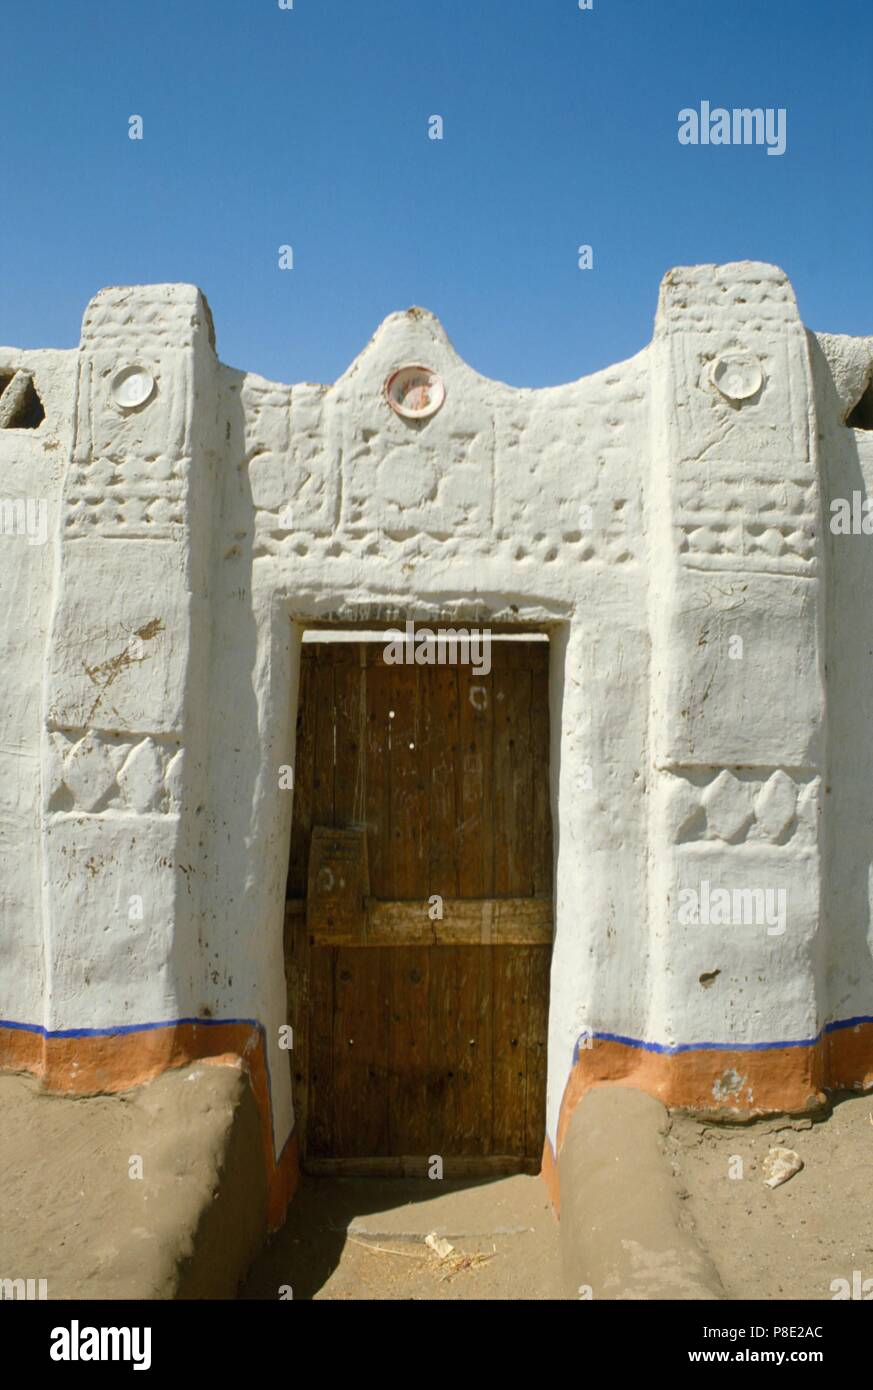 Northern Sudan, decorated door of  typical house in a Nubian village in the Tombos zone, near the Nile river Stock Photo